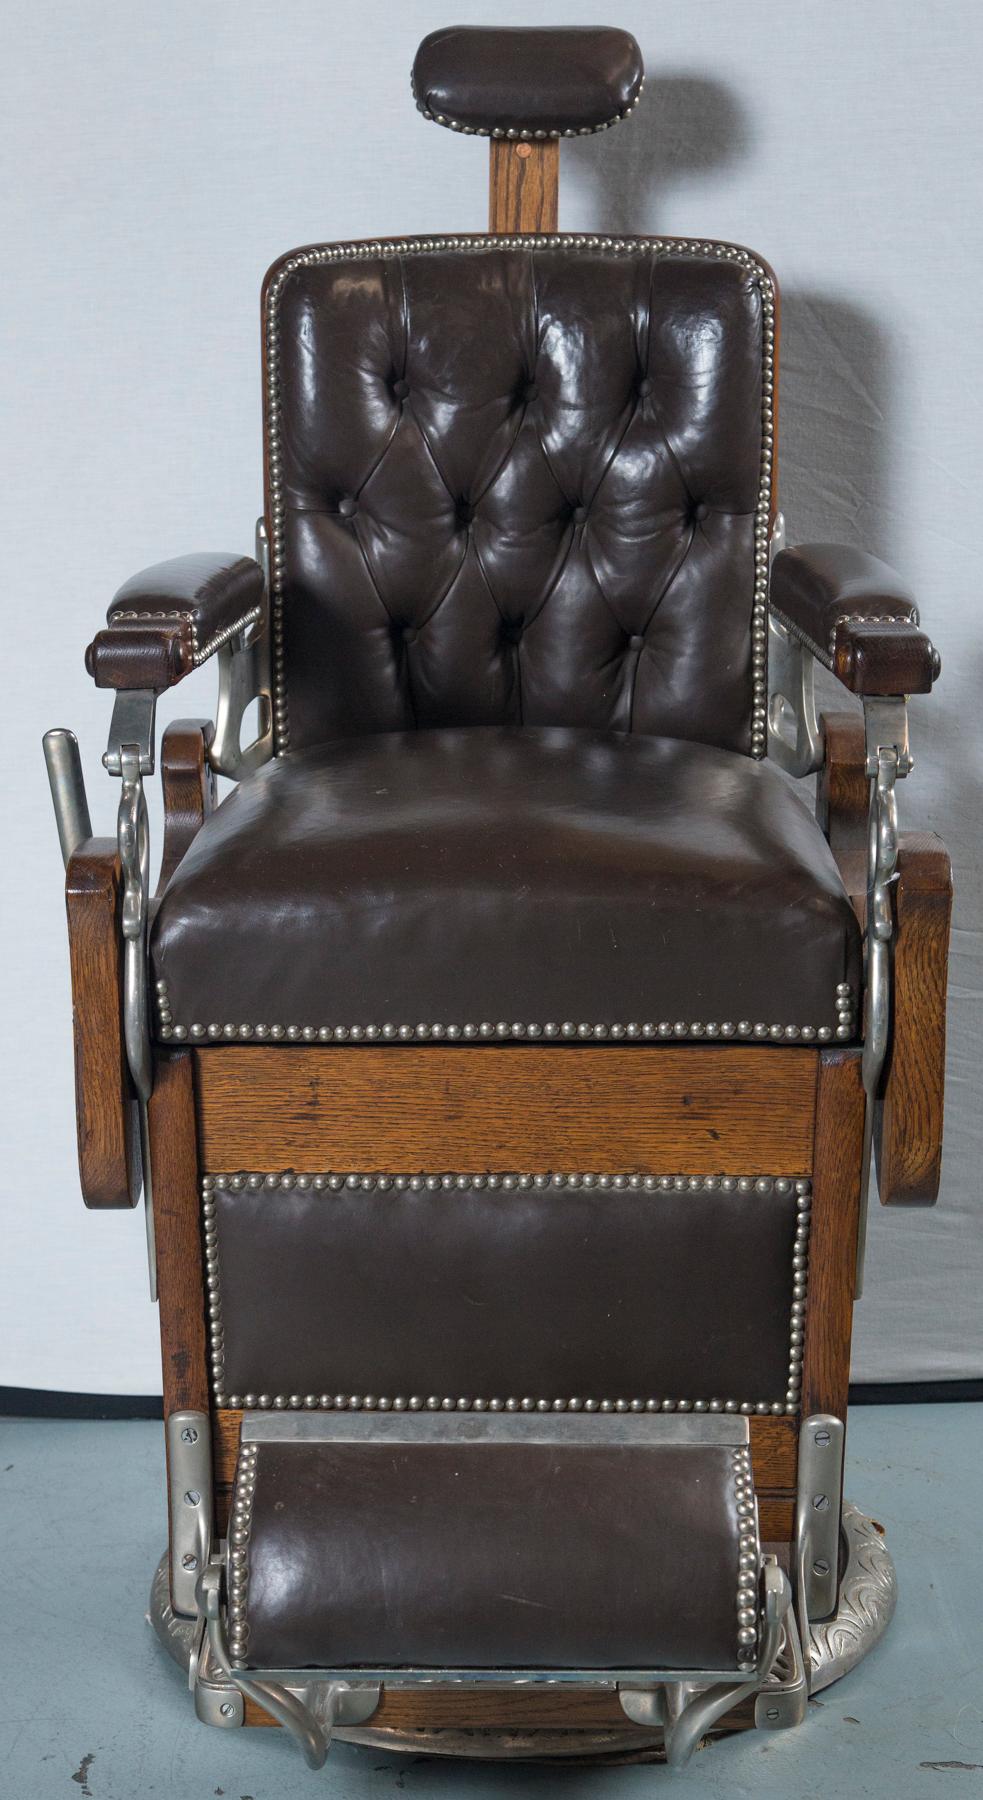 Beautiful vintage barber's chair. Signed Koken Barbers' Supply Co. St. Louis, USA Original tag on back side of chair and on the footrest. Made circa 1890 of oak with carved details on each side. Leather and nailheads replaced but in very good